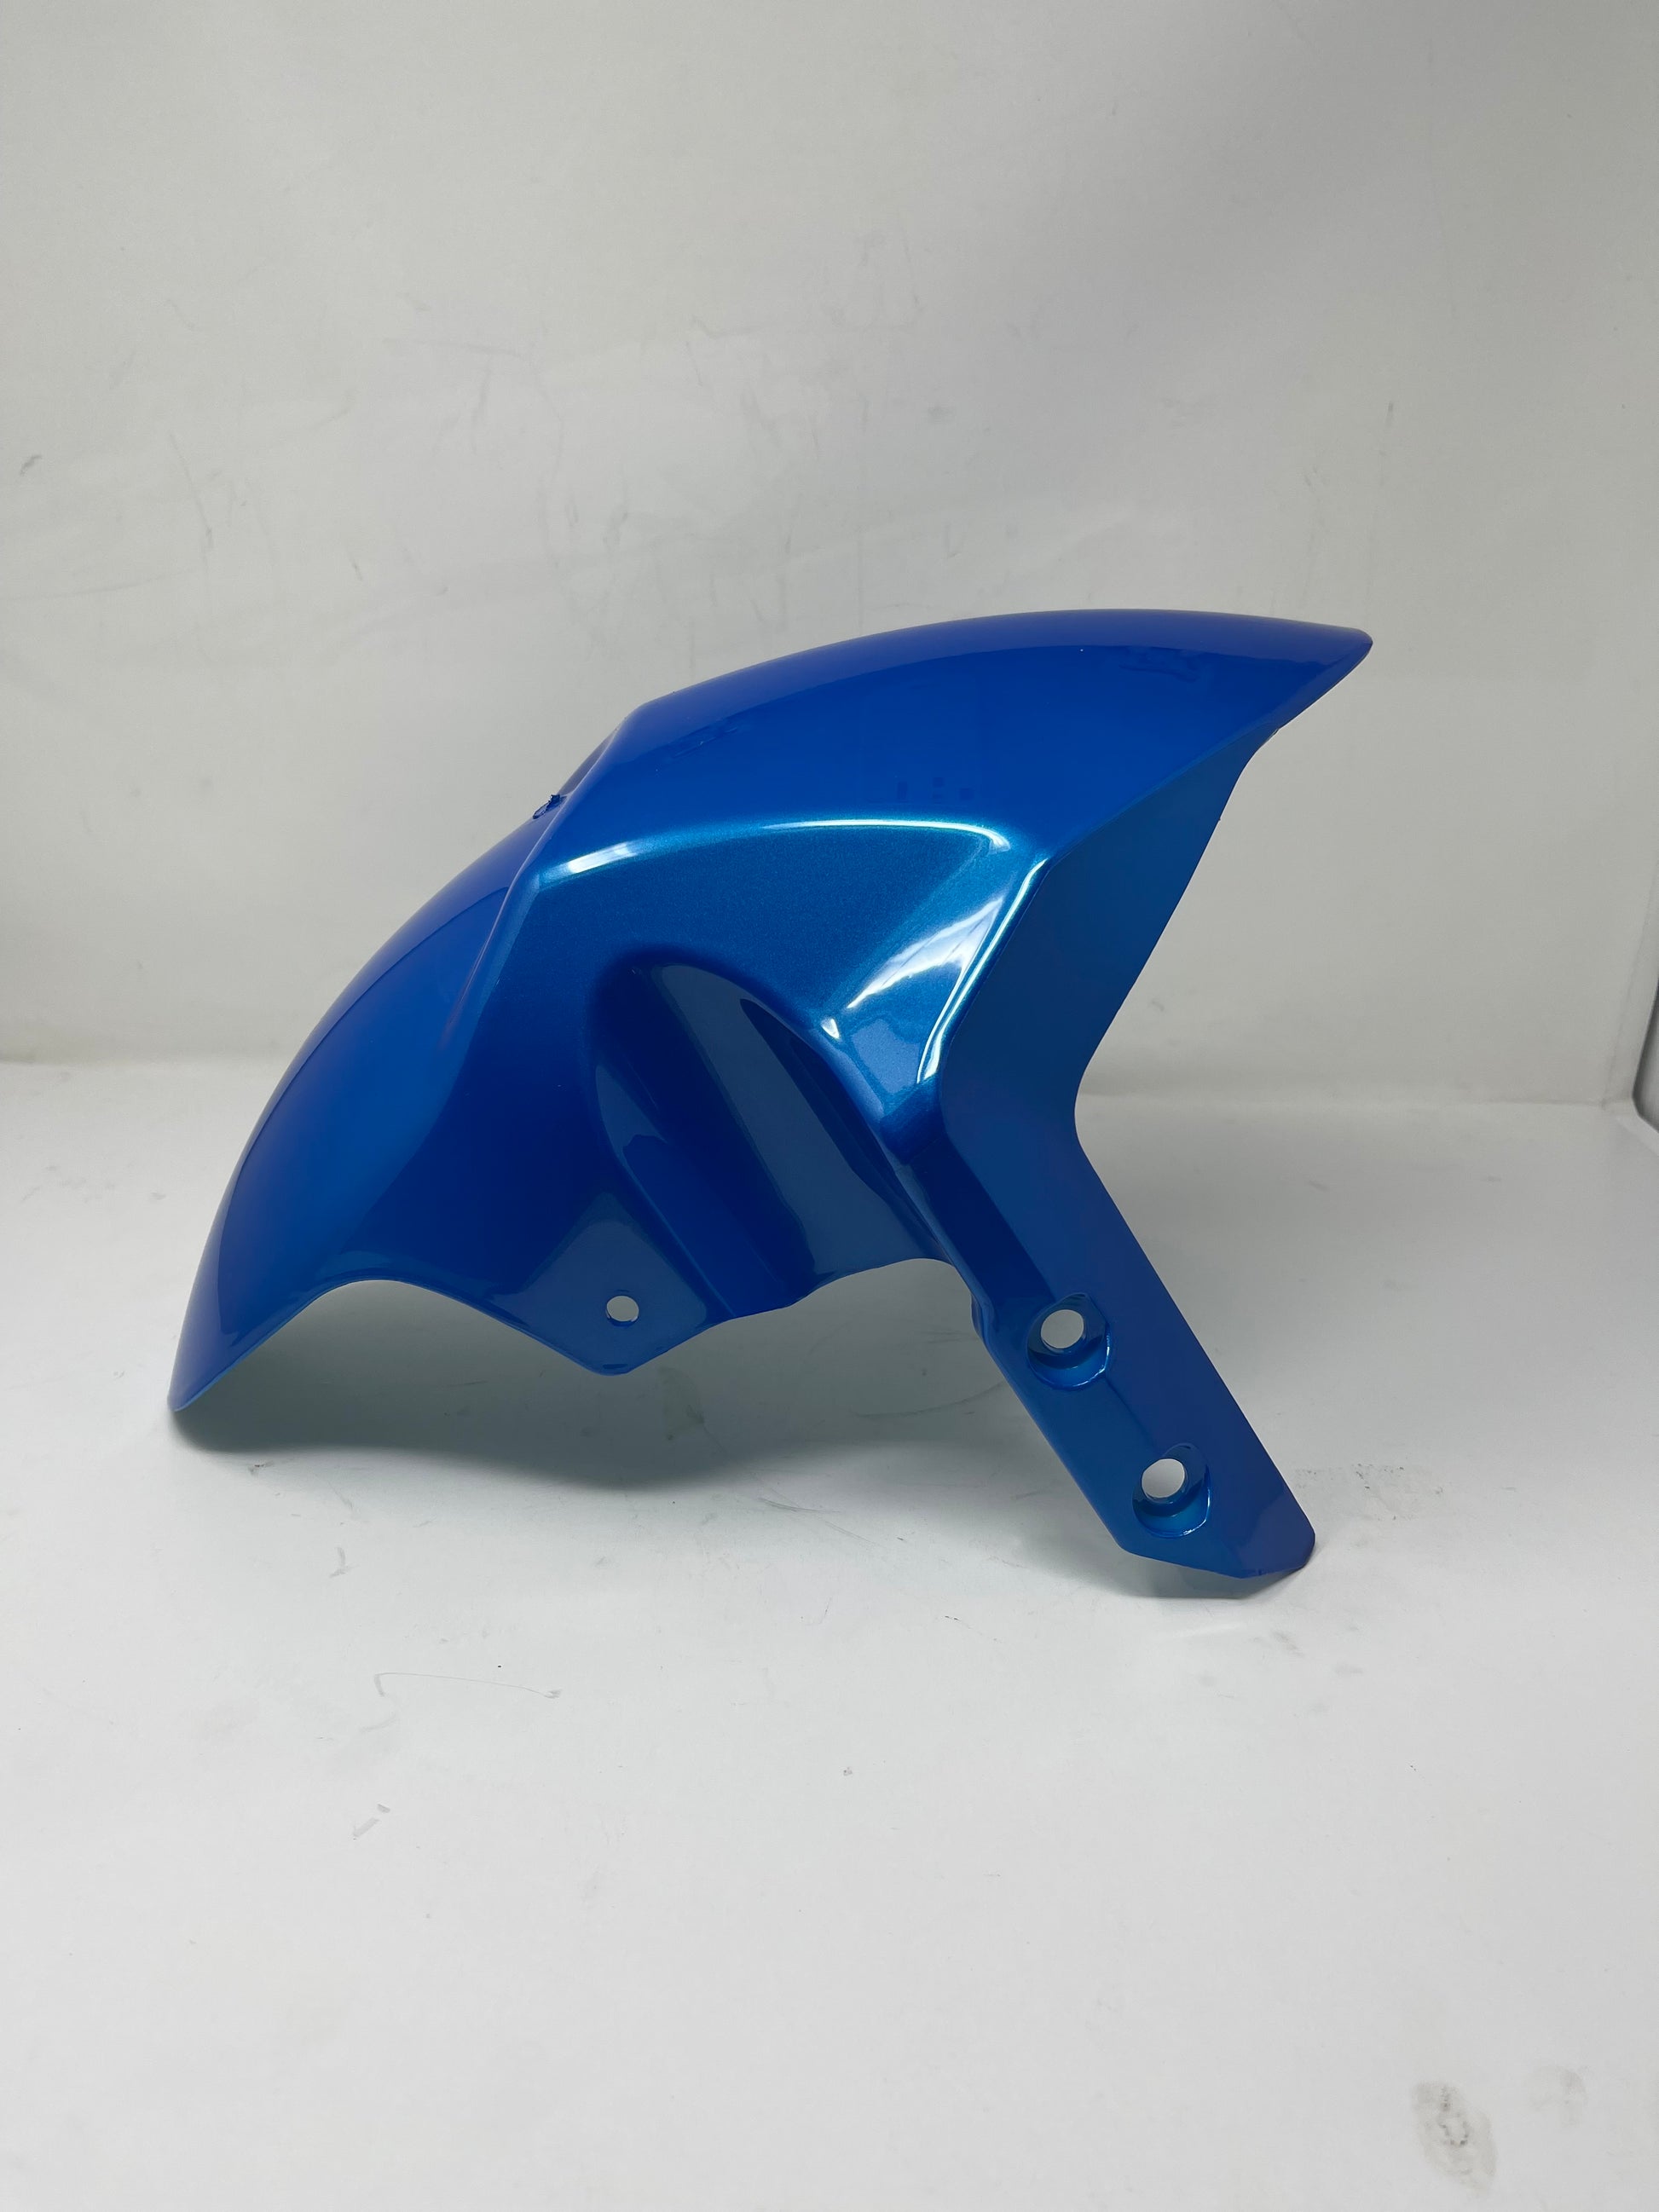 Tire fairing for Grom clone motorcycle for sale. 125010007 blue